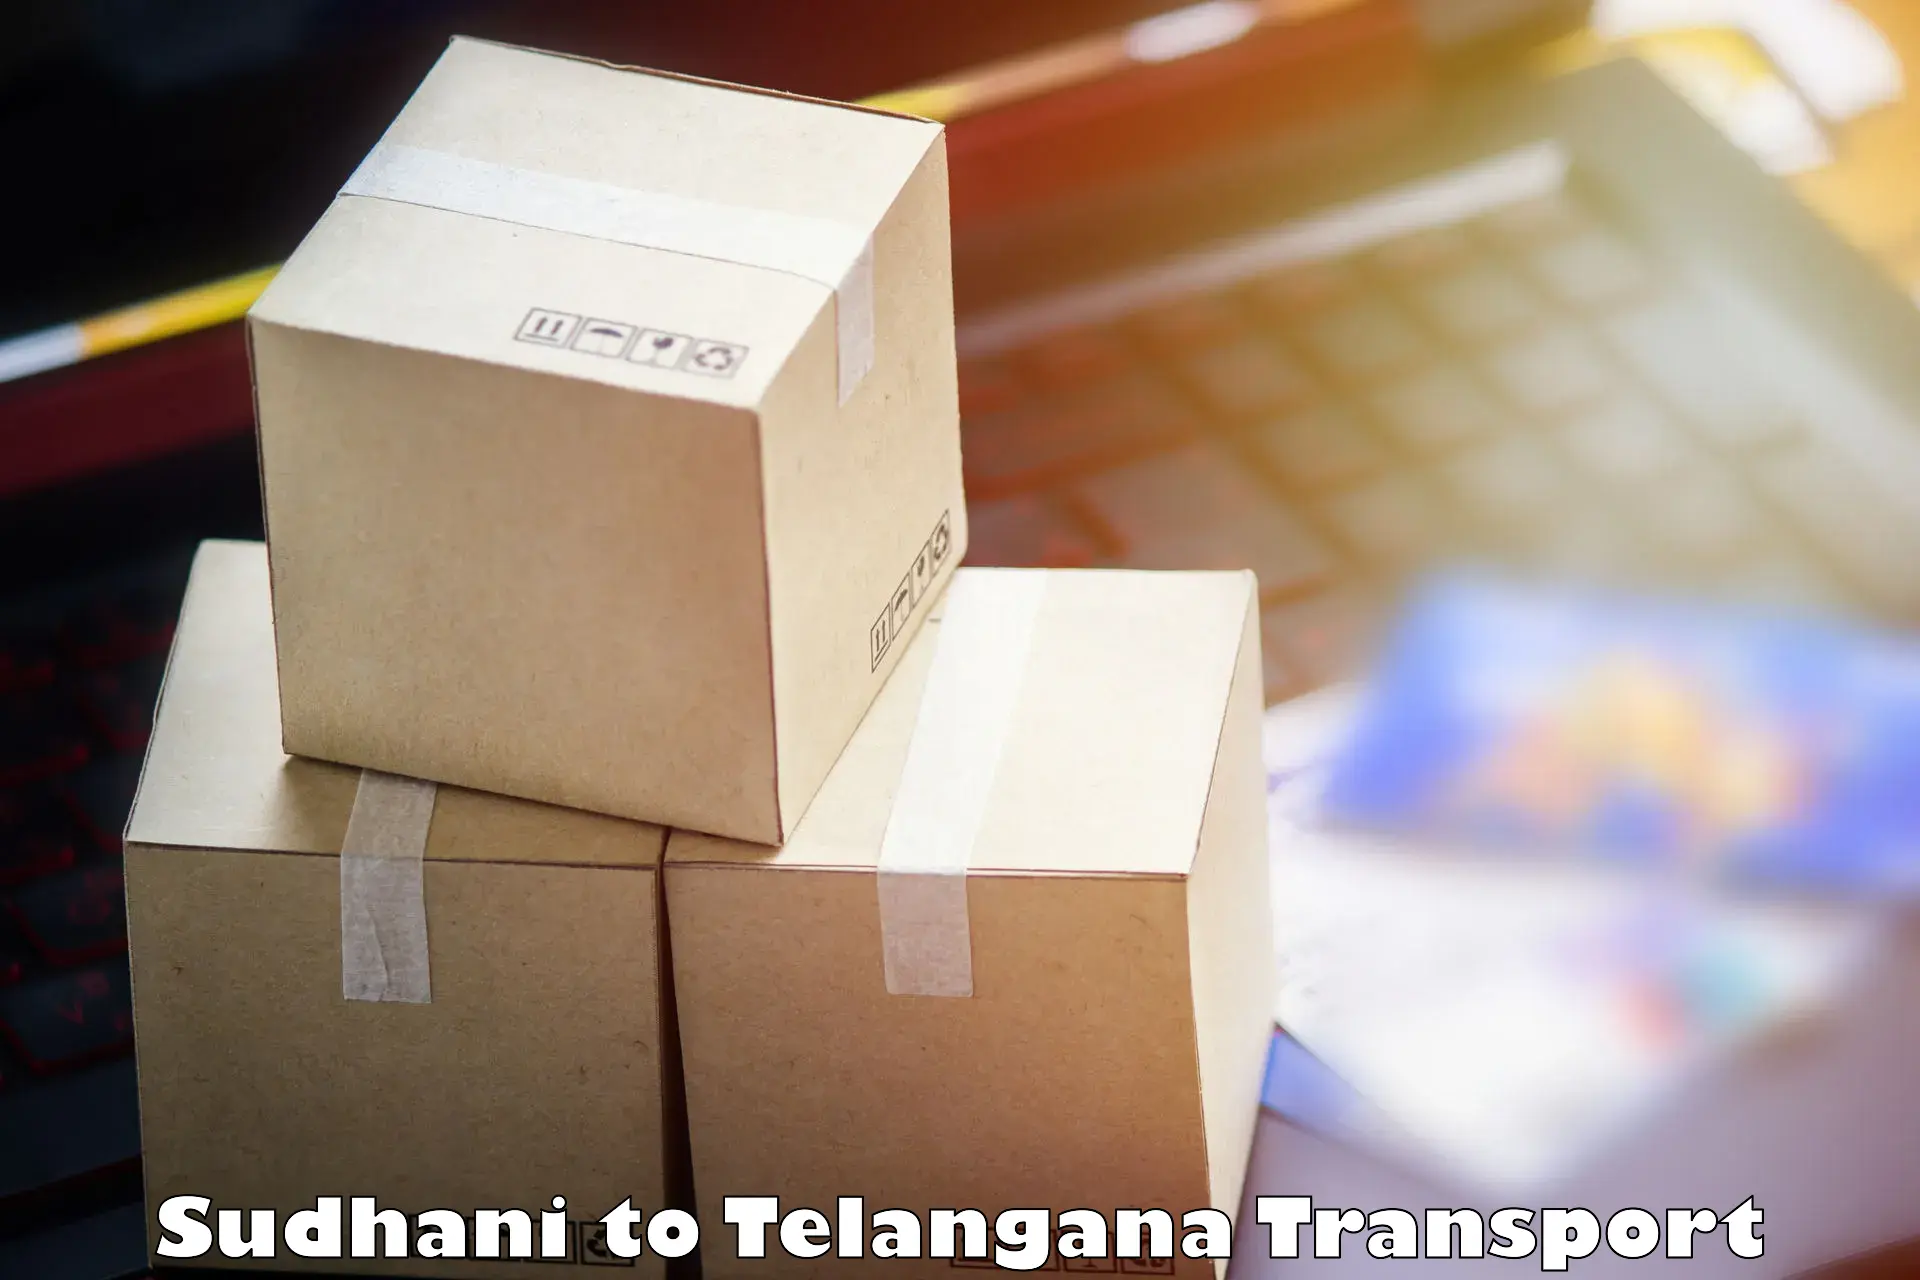 Container transportation services Sudhani to Bejjanki